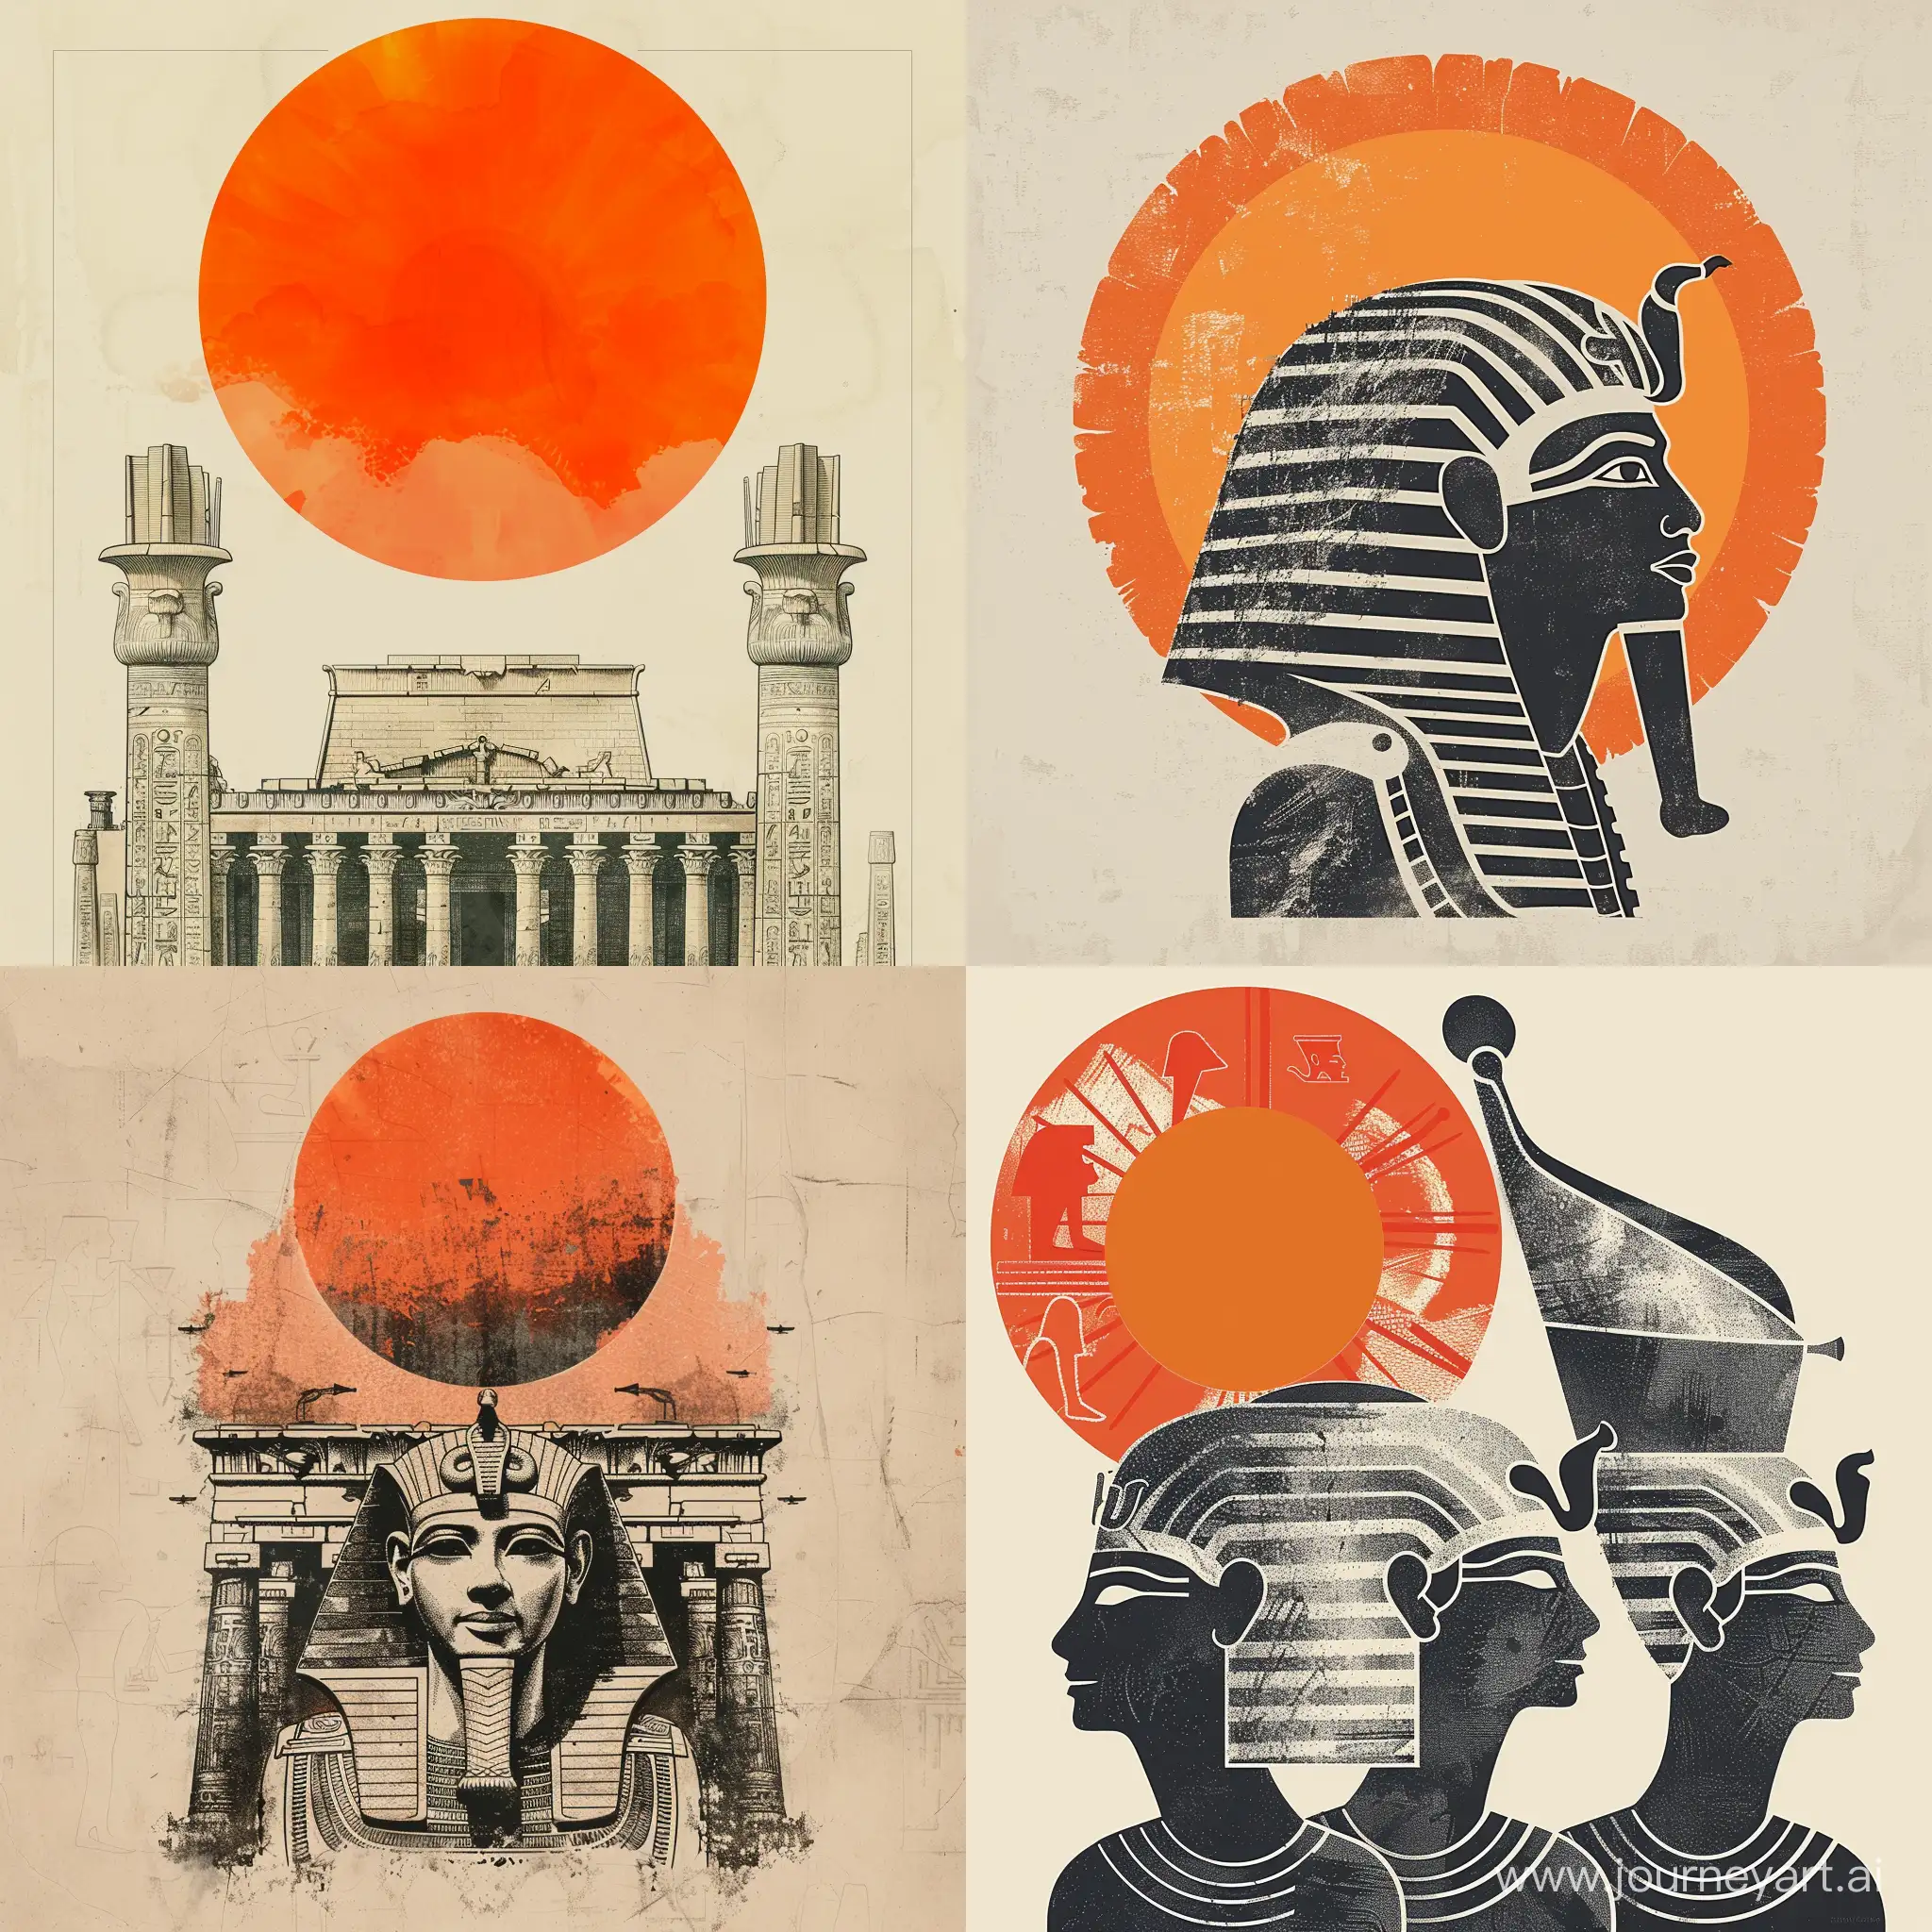 Graphic drawing of the Pharaonic civilization with an orange sun